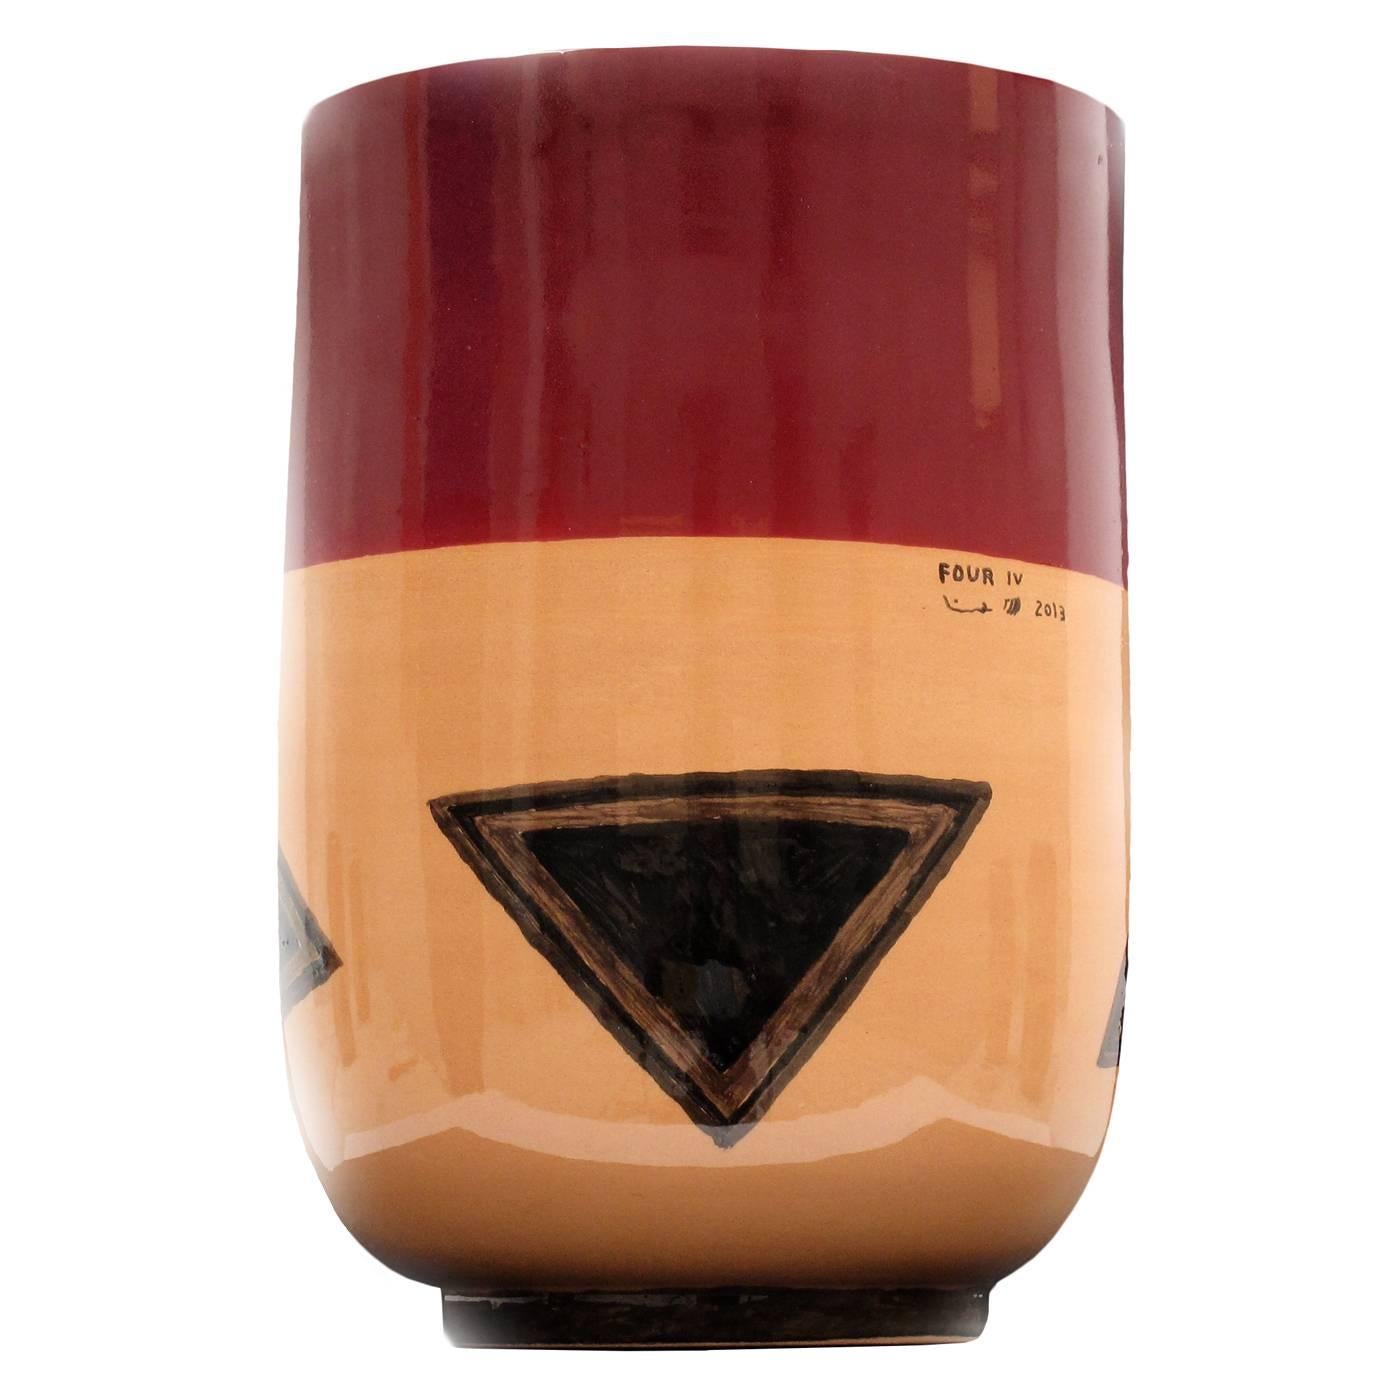 This exquisite vase is made entirely of ceramics. Its small plinth base supports a cylinder that curves at the base to resemble a large cup. The smooth surface of the piece is in a color block combination of deep maroon and rich orange, on which are